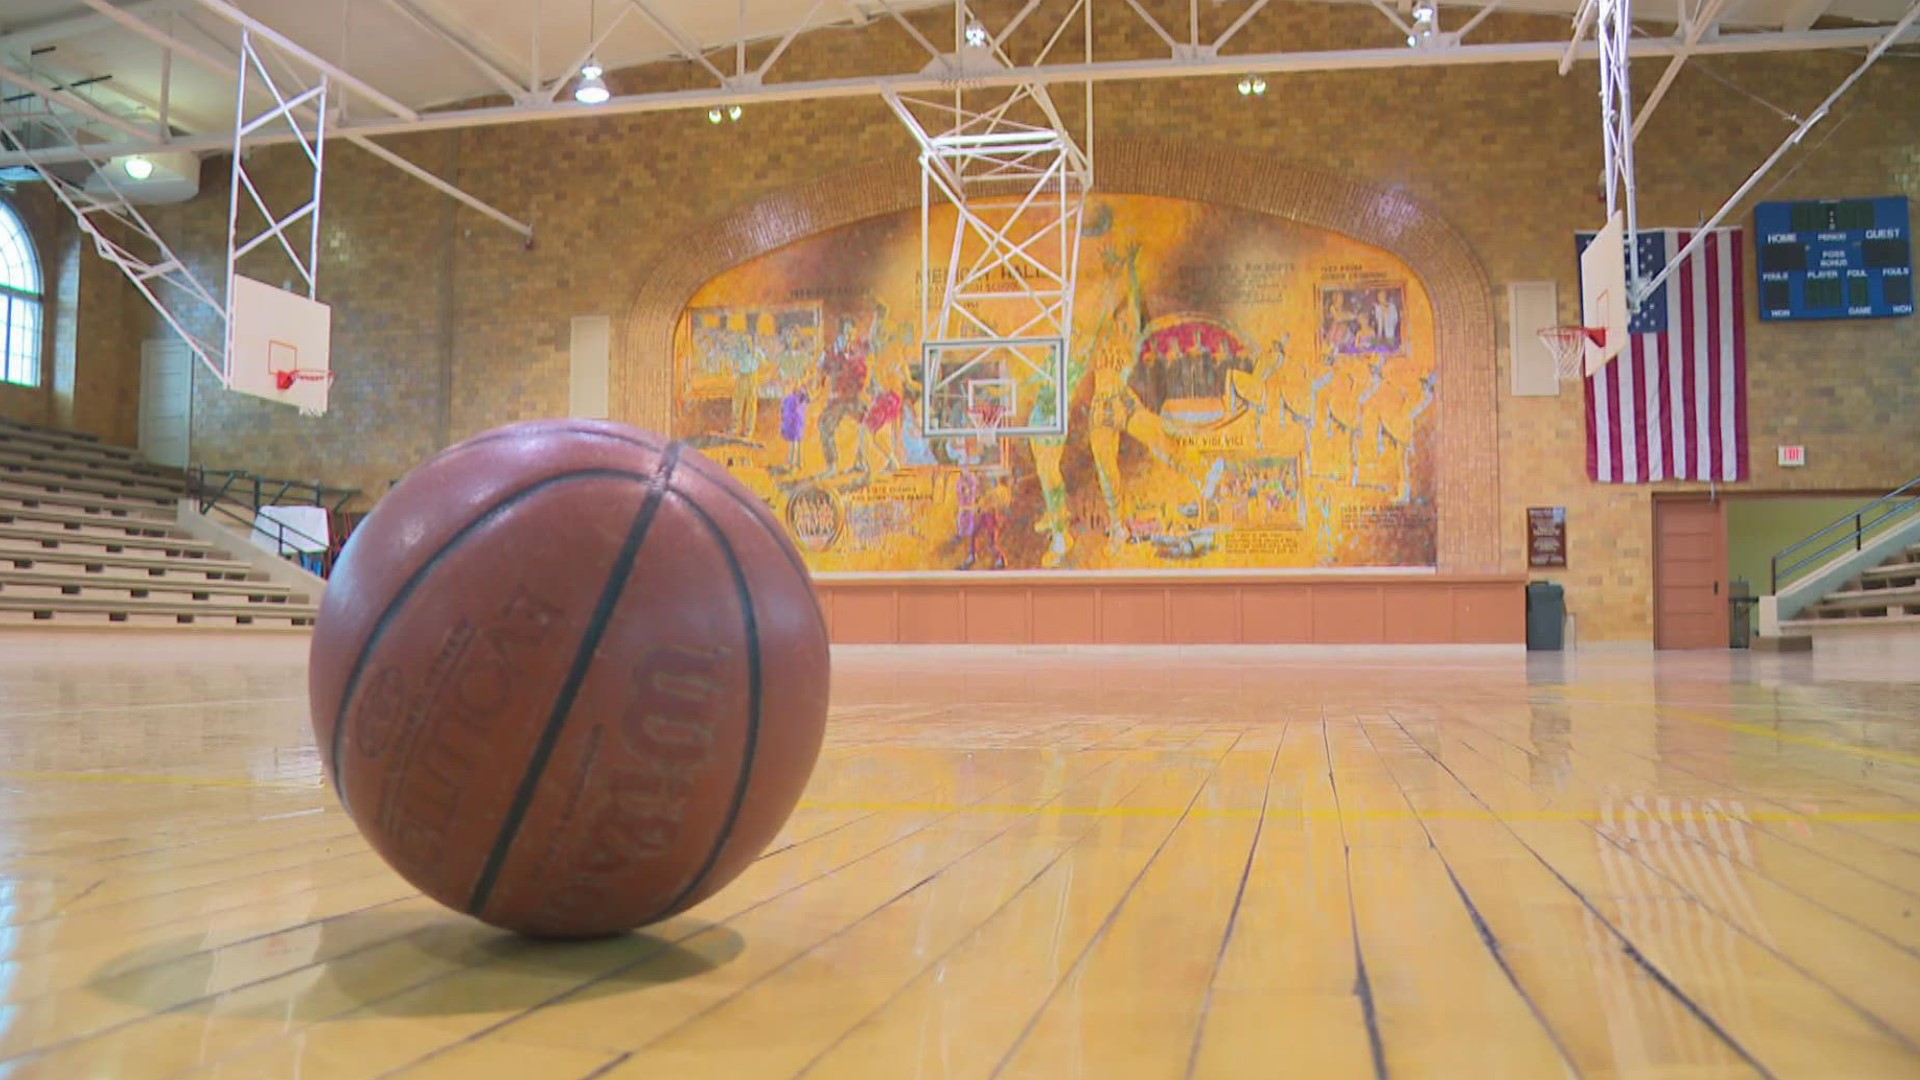 The gym, built in the 1930s, played host to Lebanon High School basketball games into the 1960s.